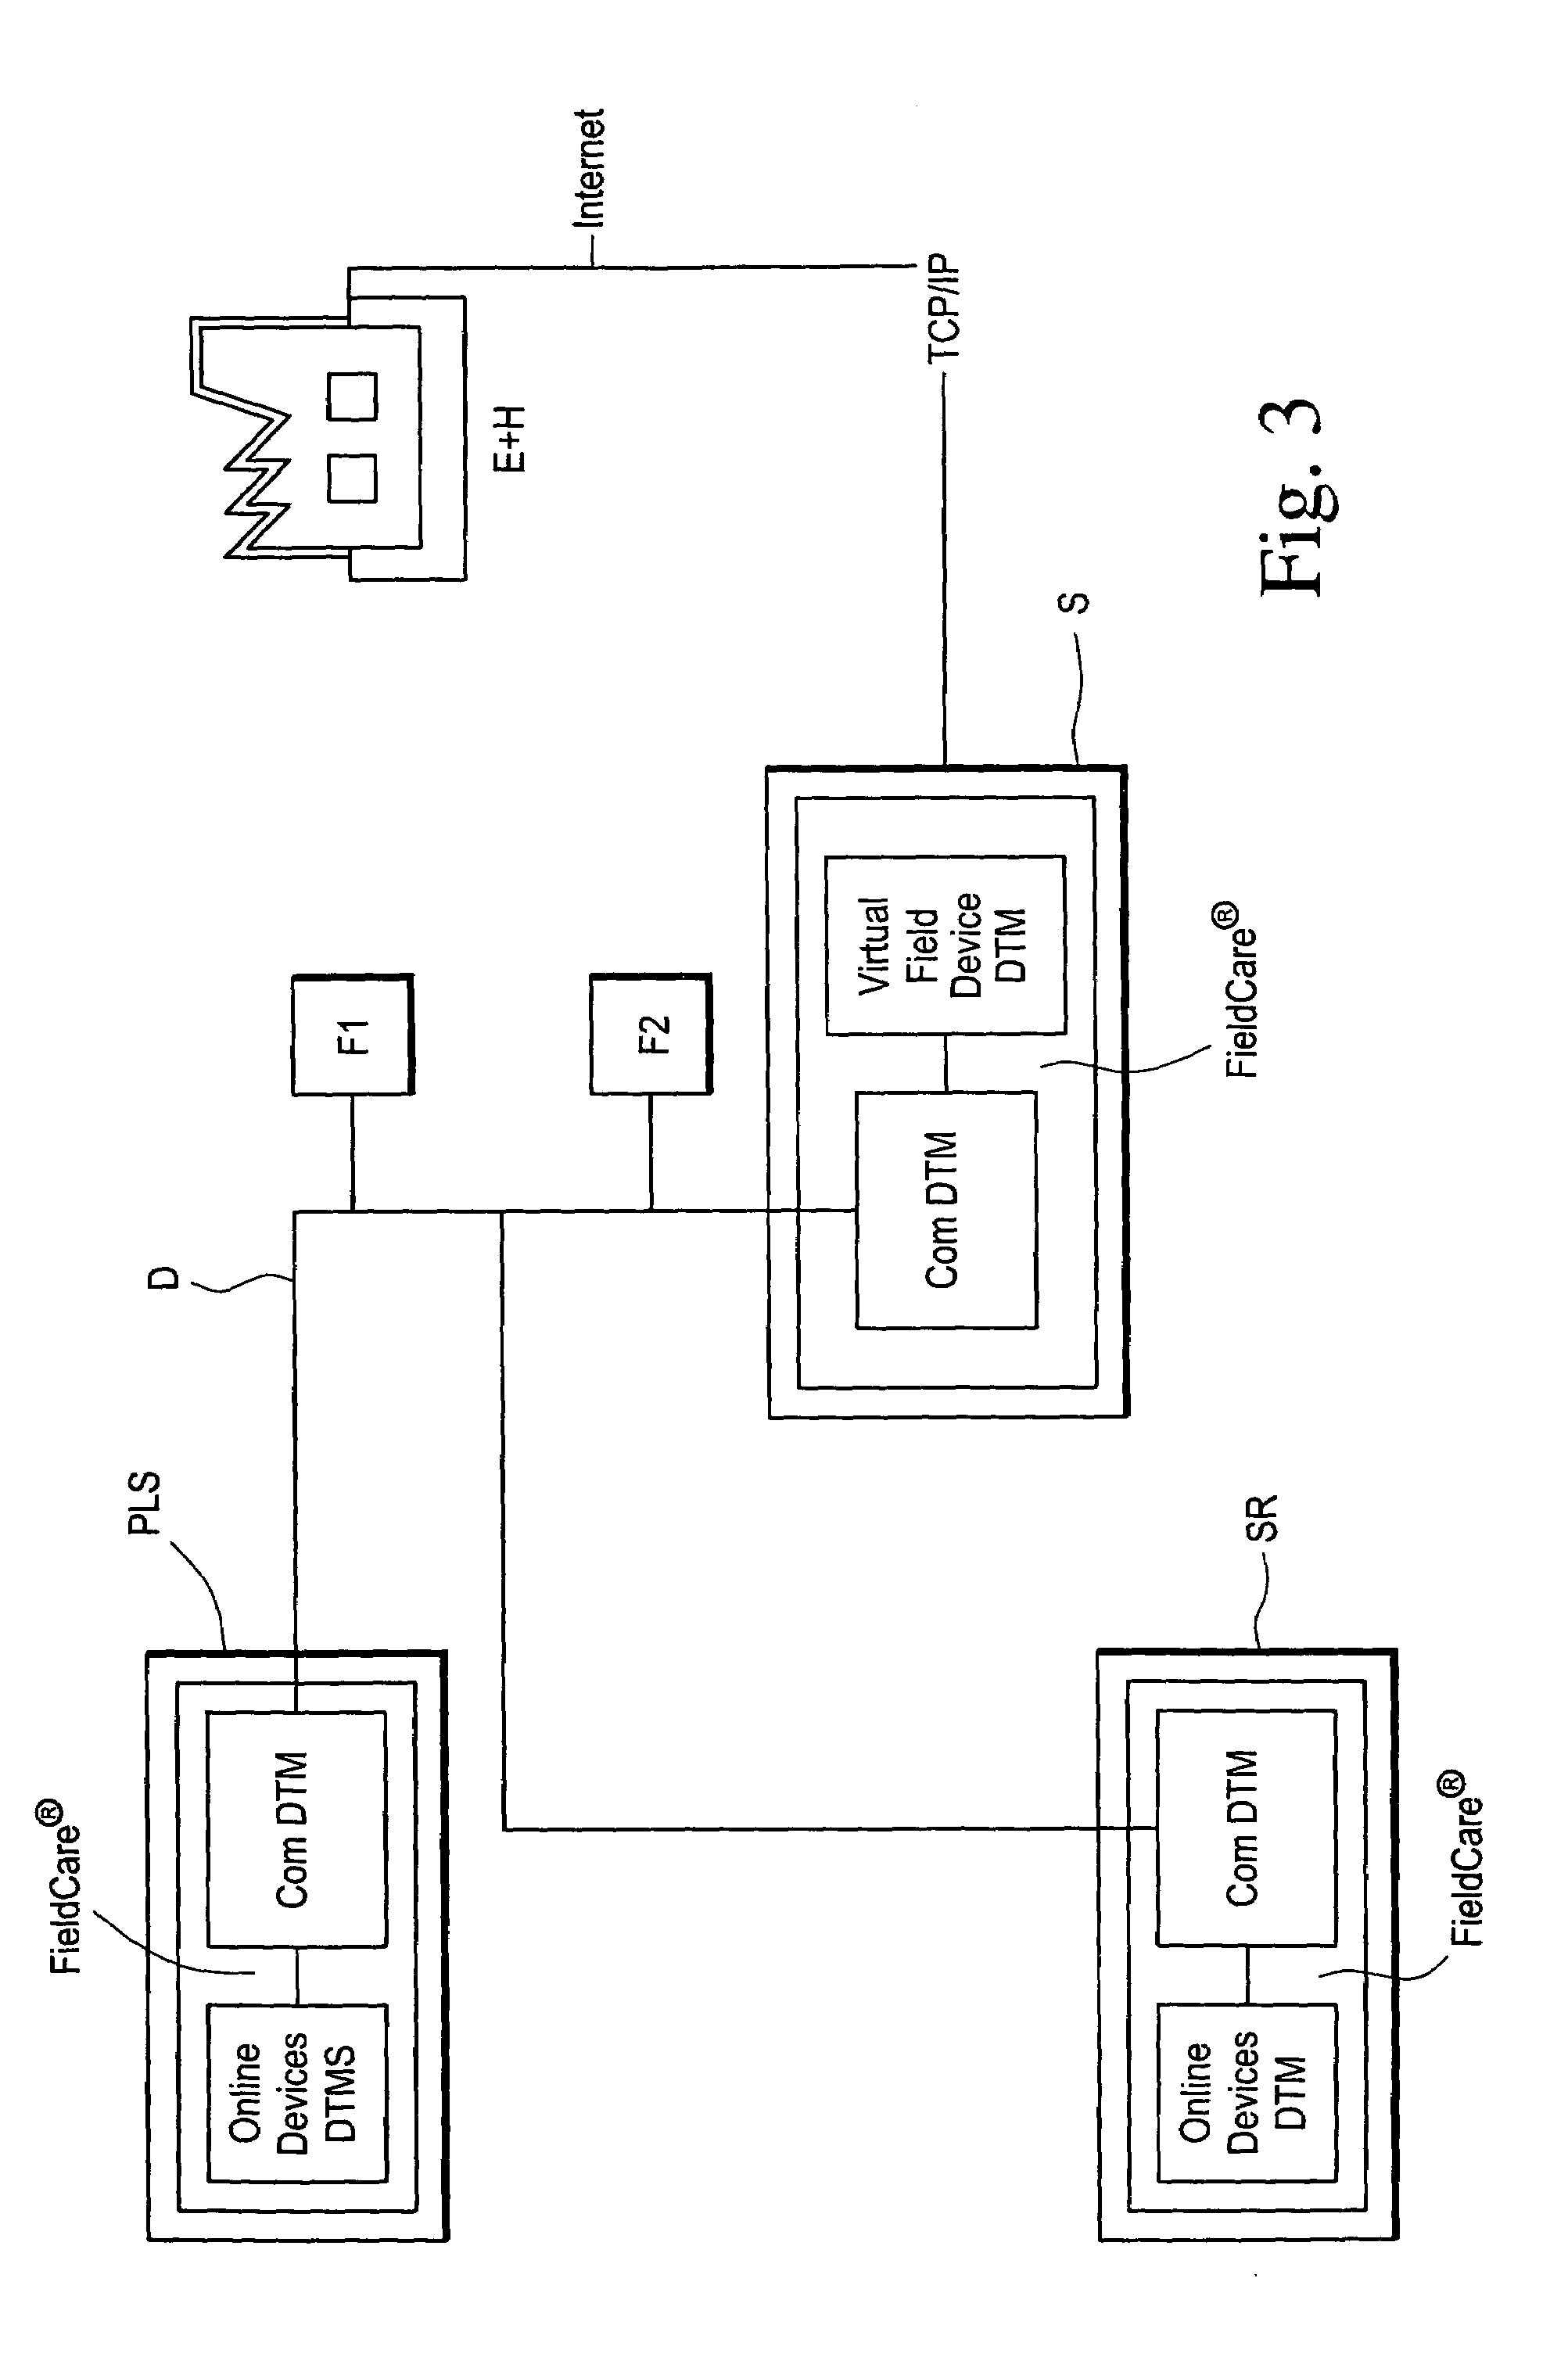 Method for offline-parametering of a field device of the process automation technology